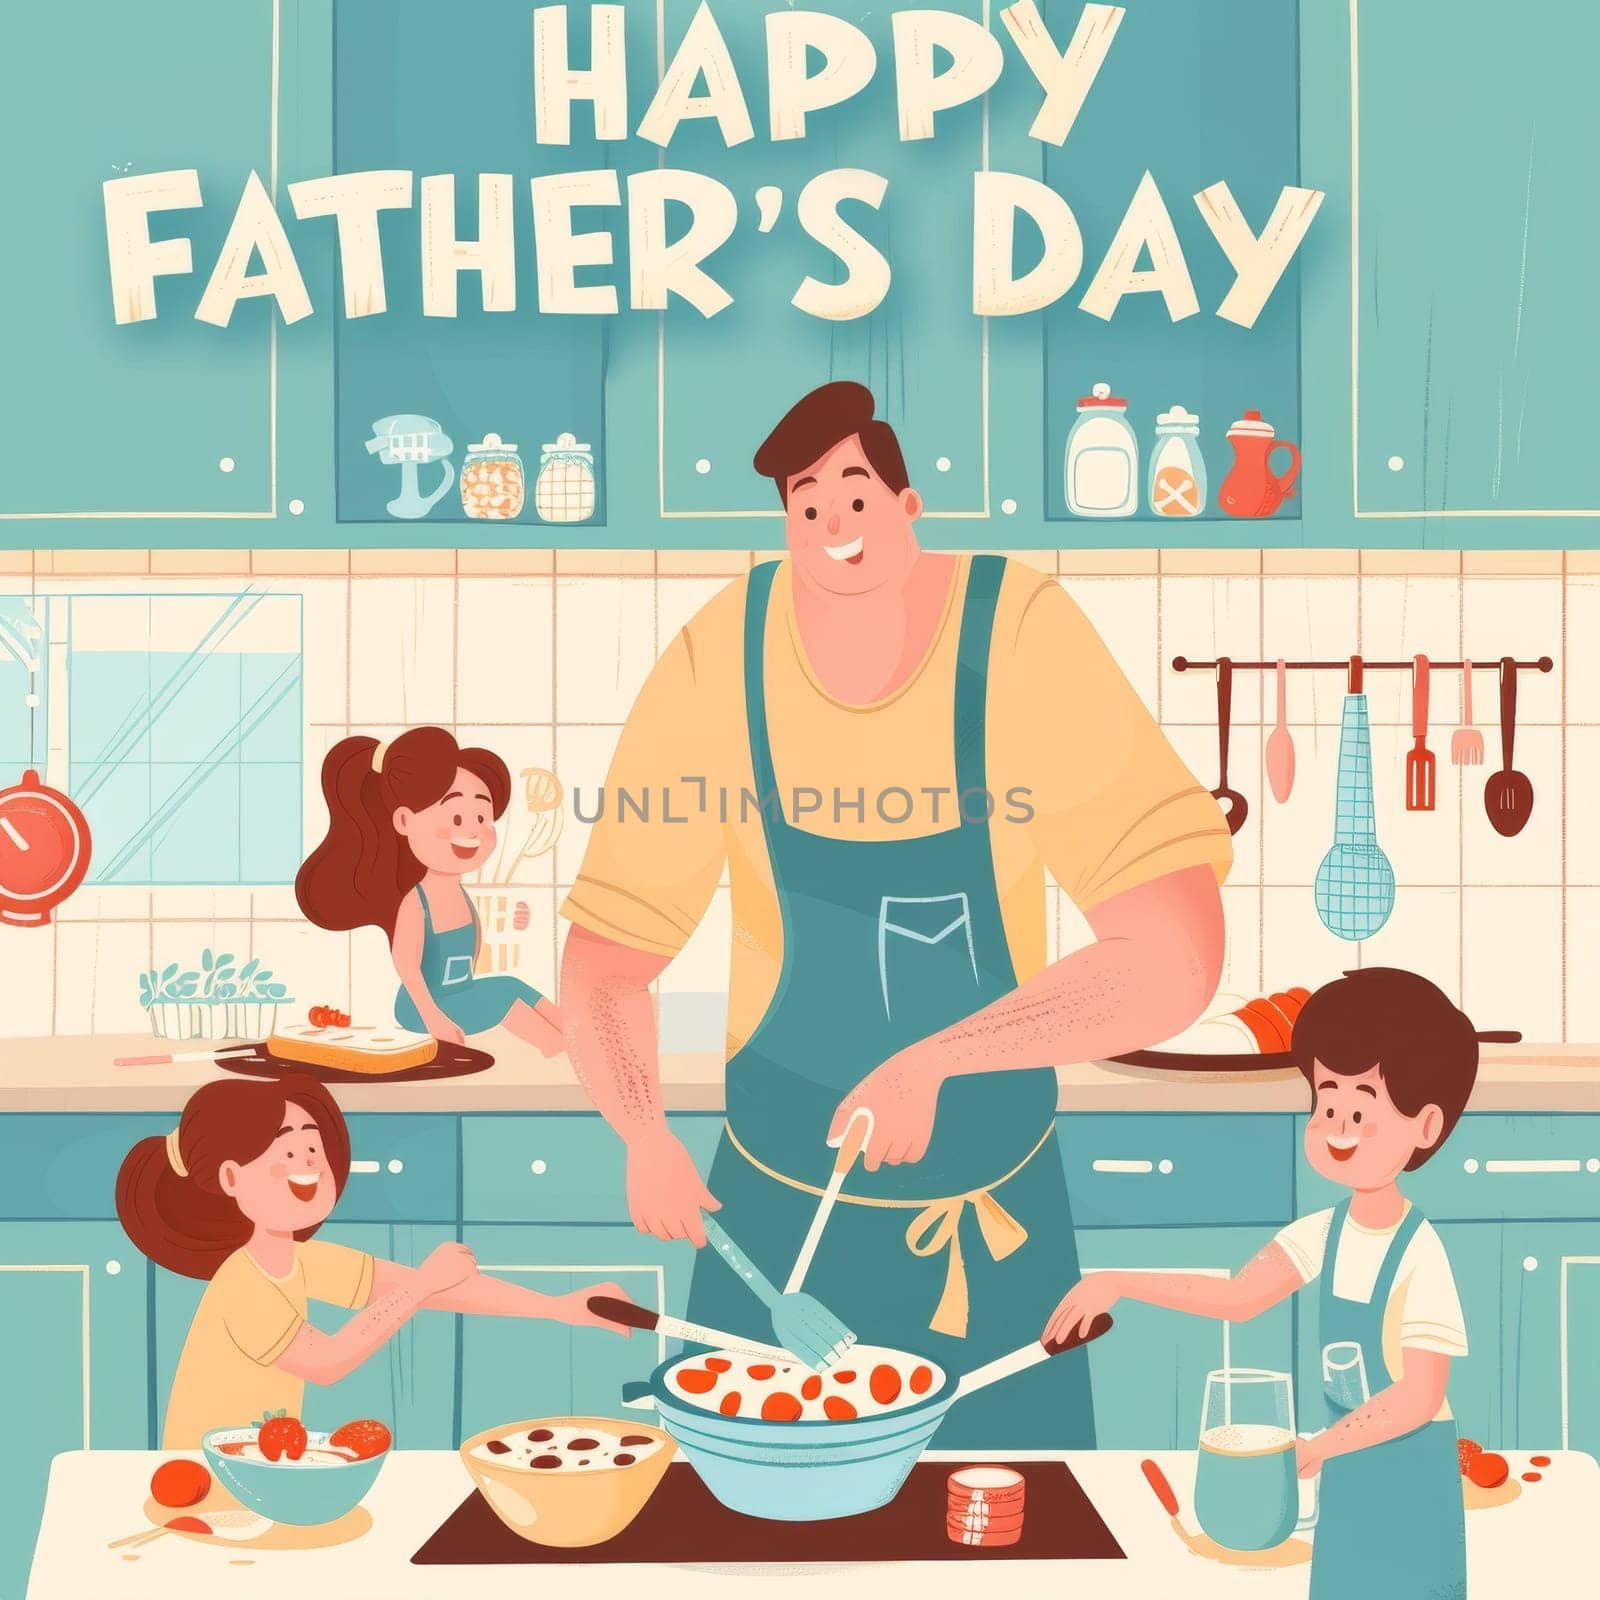 Animated illustration of a dad cooking with his kids in a kitchen, celebrating Fathers Day with a home-cooked meal and smiles. by sfinks